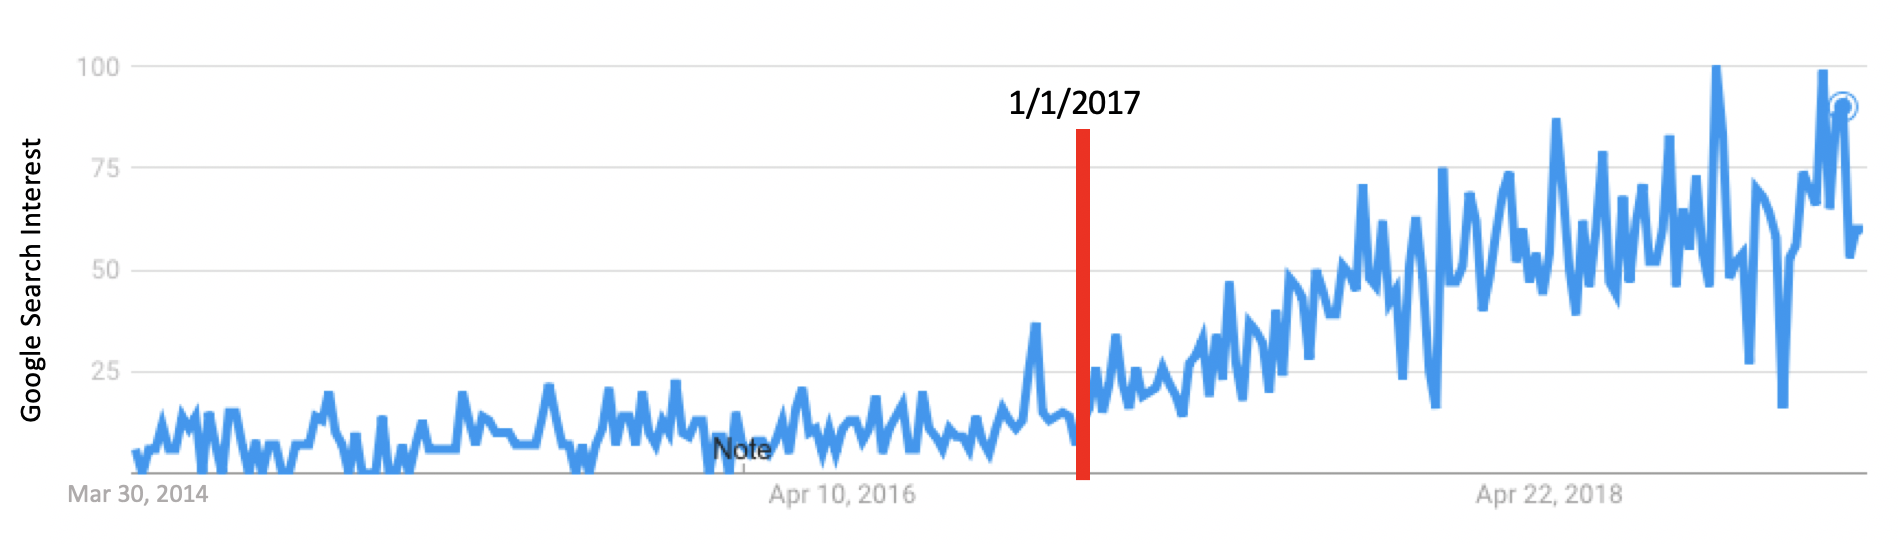 Google trends showing the upward trend of edge computing